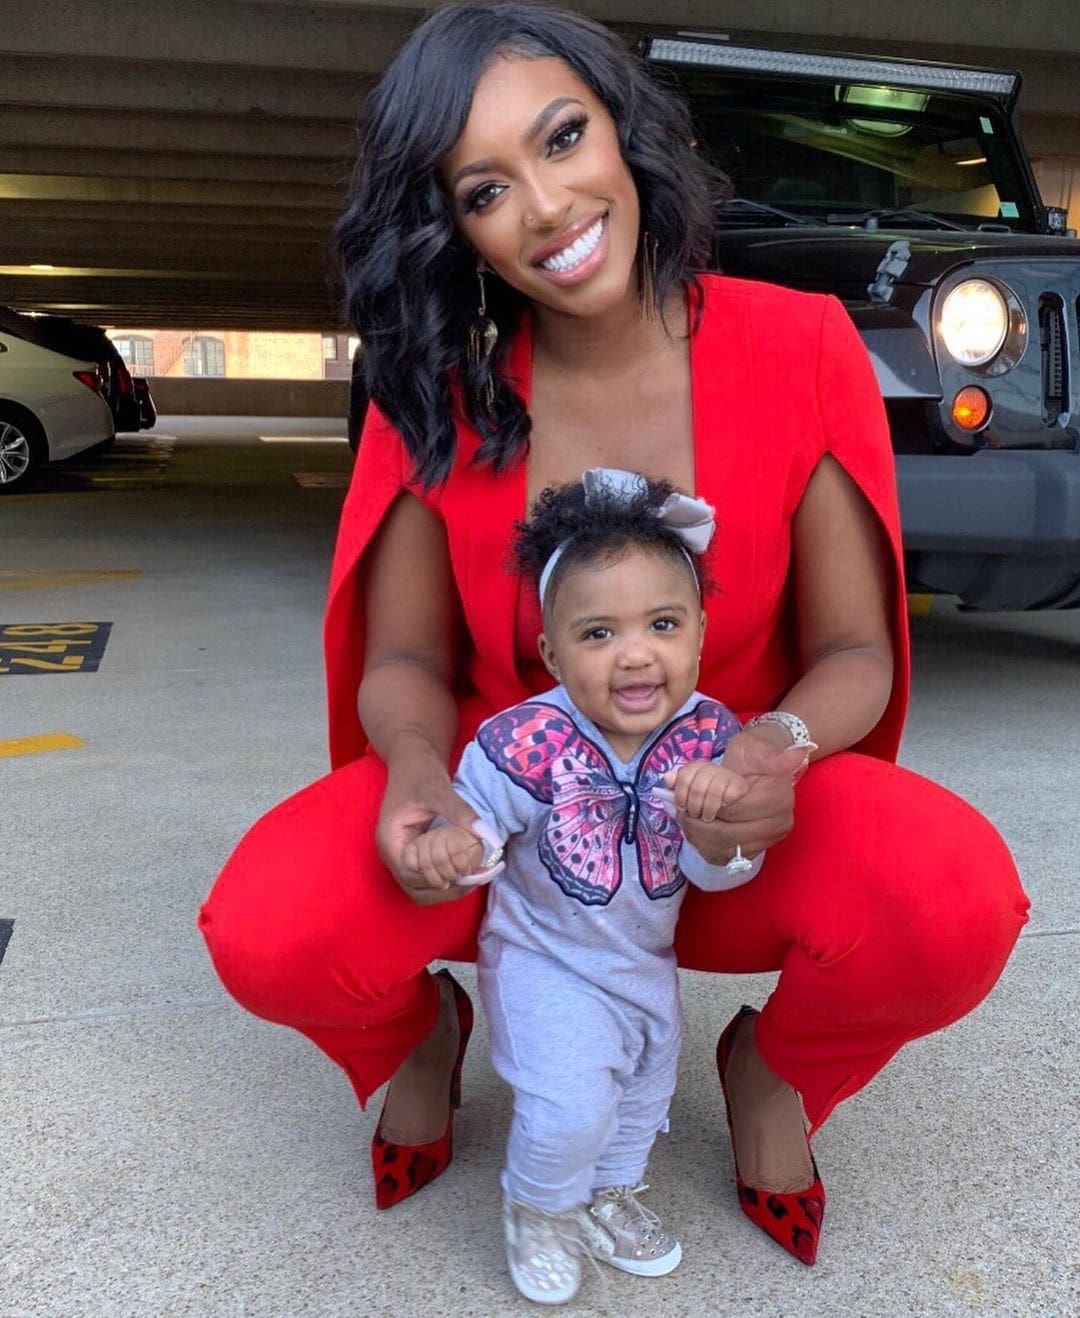 Porsha Williams Gets An Expensive Gift And Her Daughter Pilar Jhena Is Here For It - See The Cute Videos